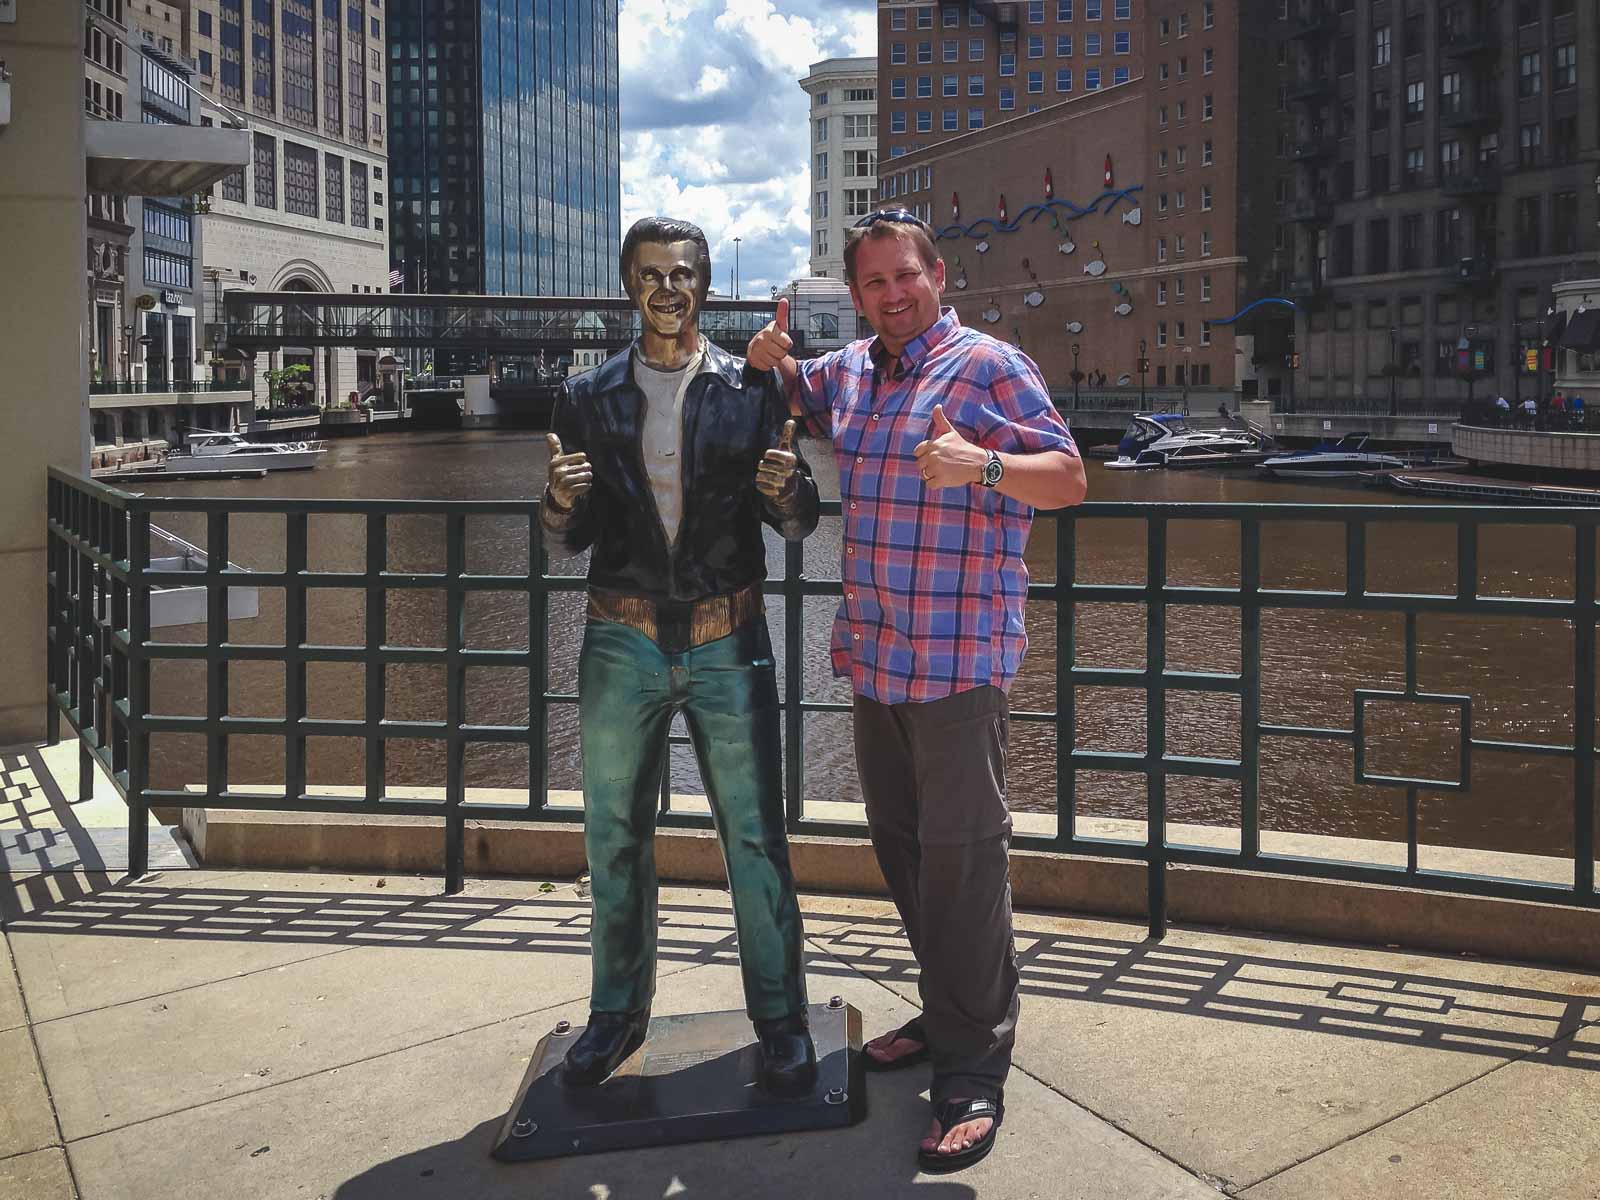 The Fonz statue in Milwaukee